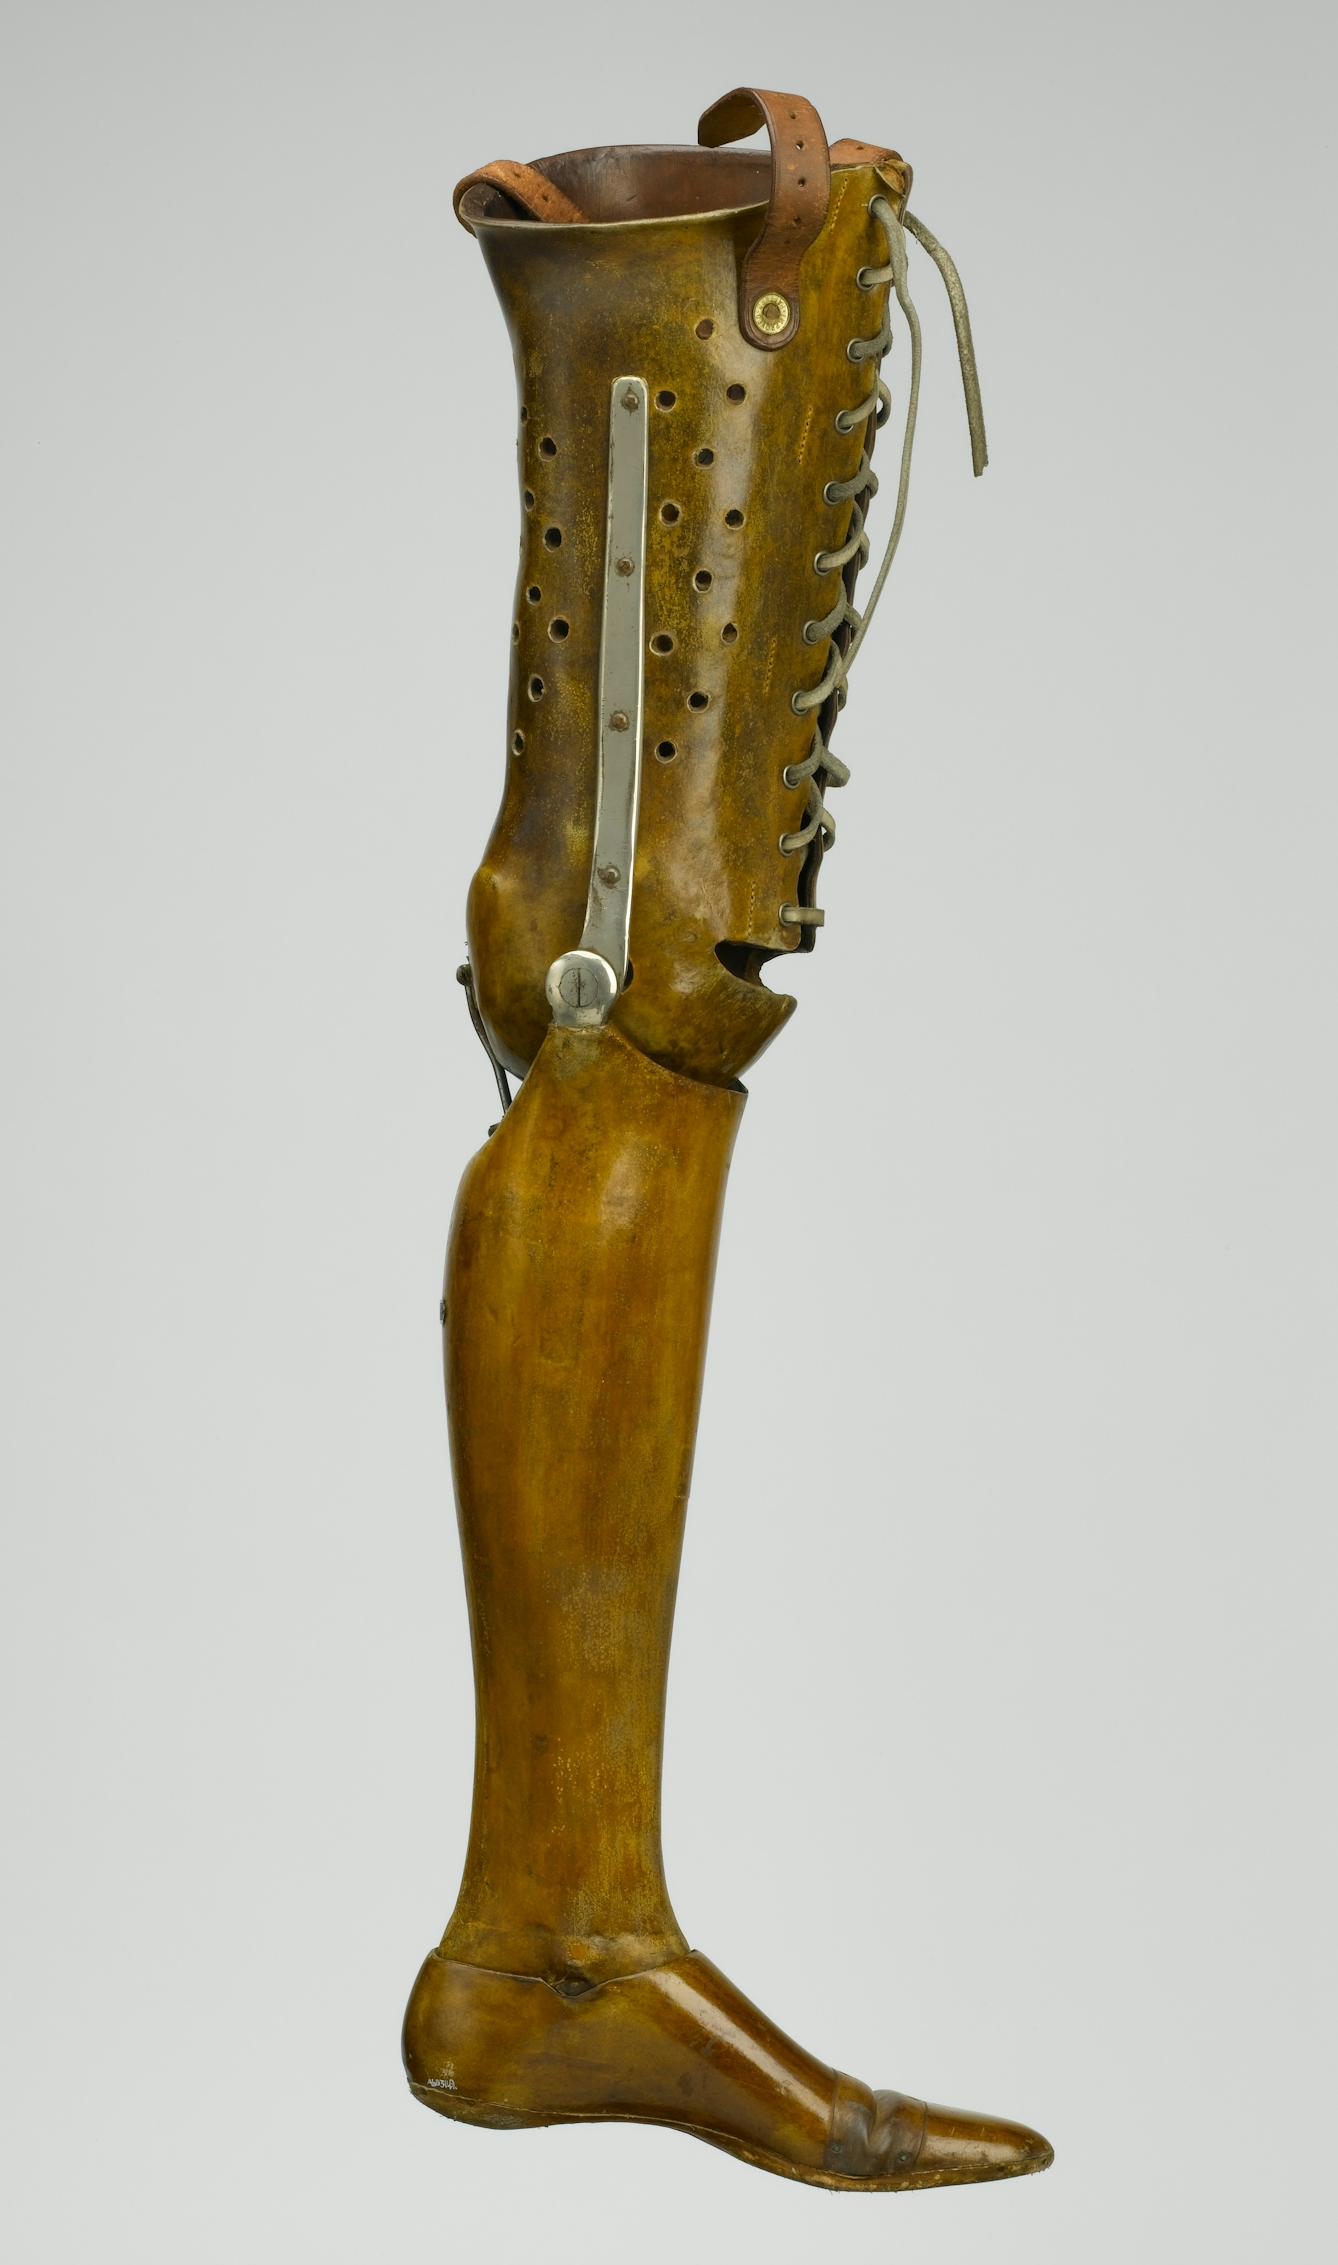 The leather corset at the top of this left leg secures the prosthesis to the thigh. It's perforated so the wearer doesn't get too hot. Inside the calf is a v-shaped metal bar attached to a spring. This prevents the wearer falling forward, but allows them to walk with comfort. The ankle and knee joints are lockable, and the toes are made of flexible leather.